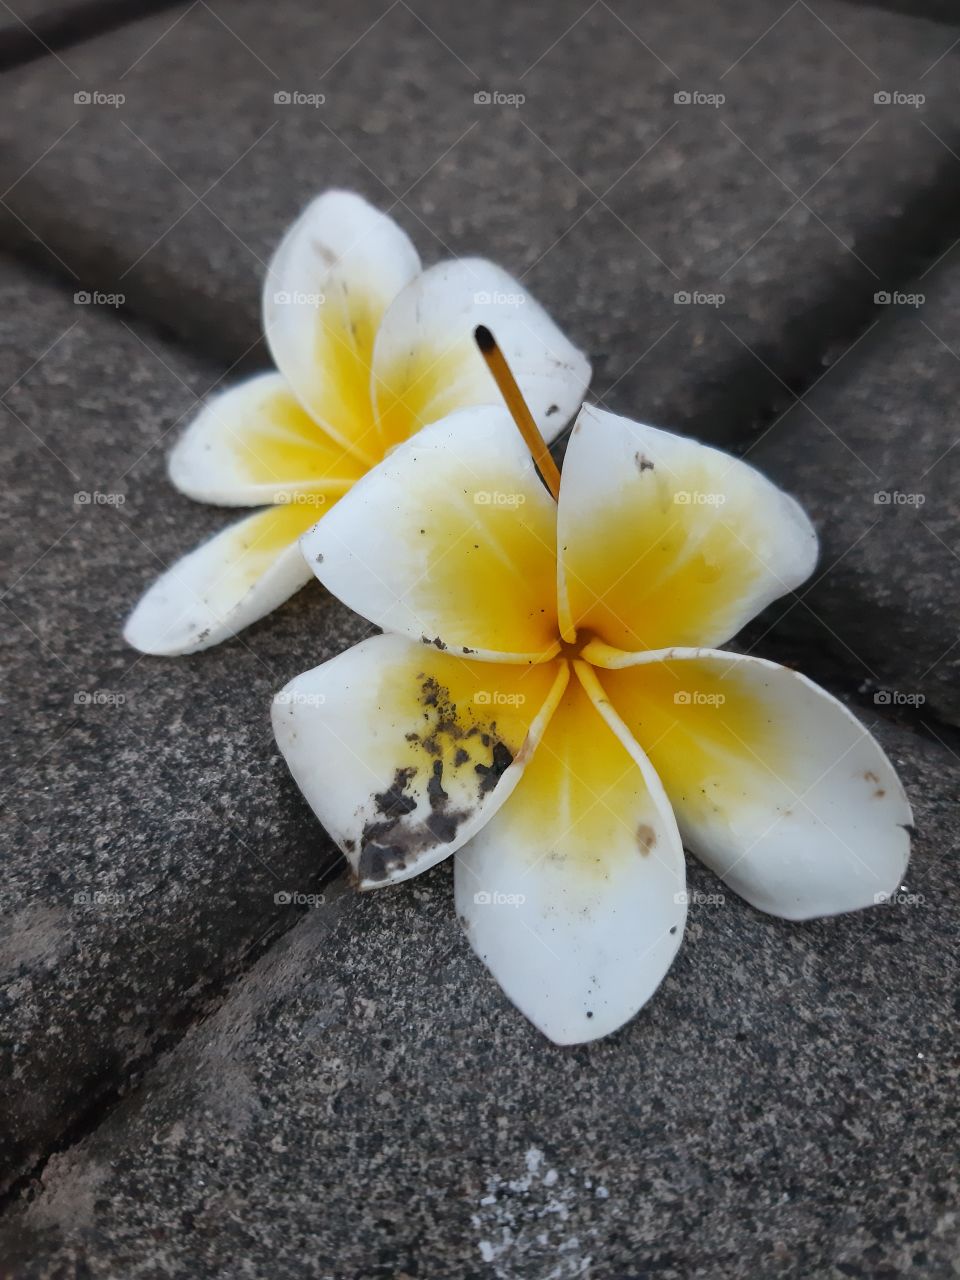 Two beautiful frangipani flowers that was used as a means of praying for Hinduist